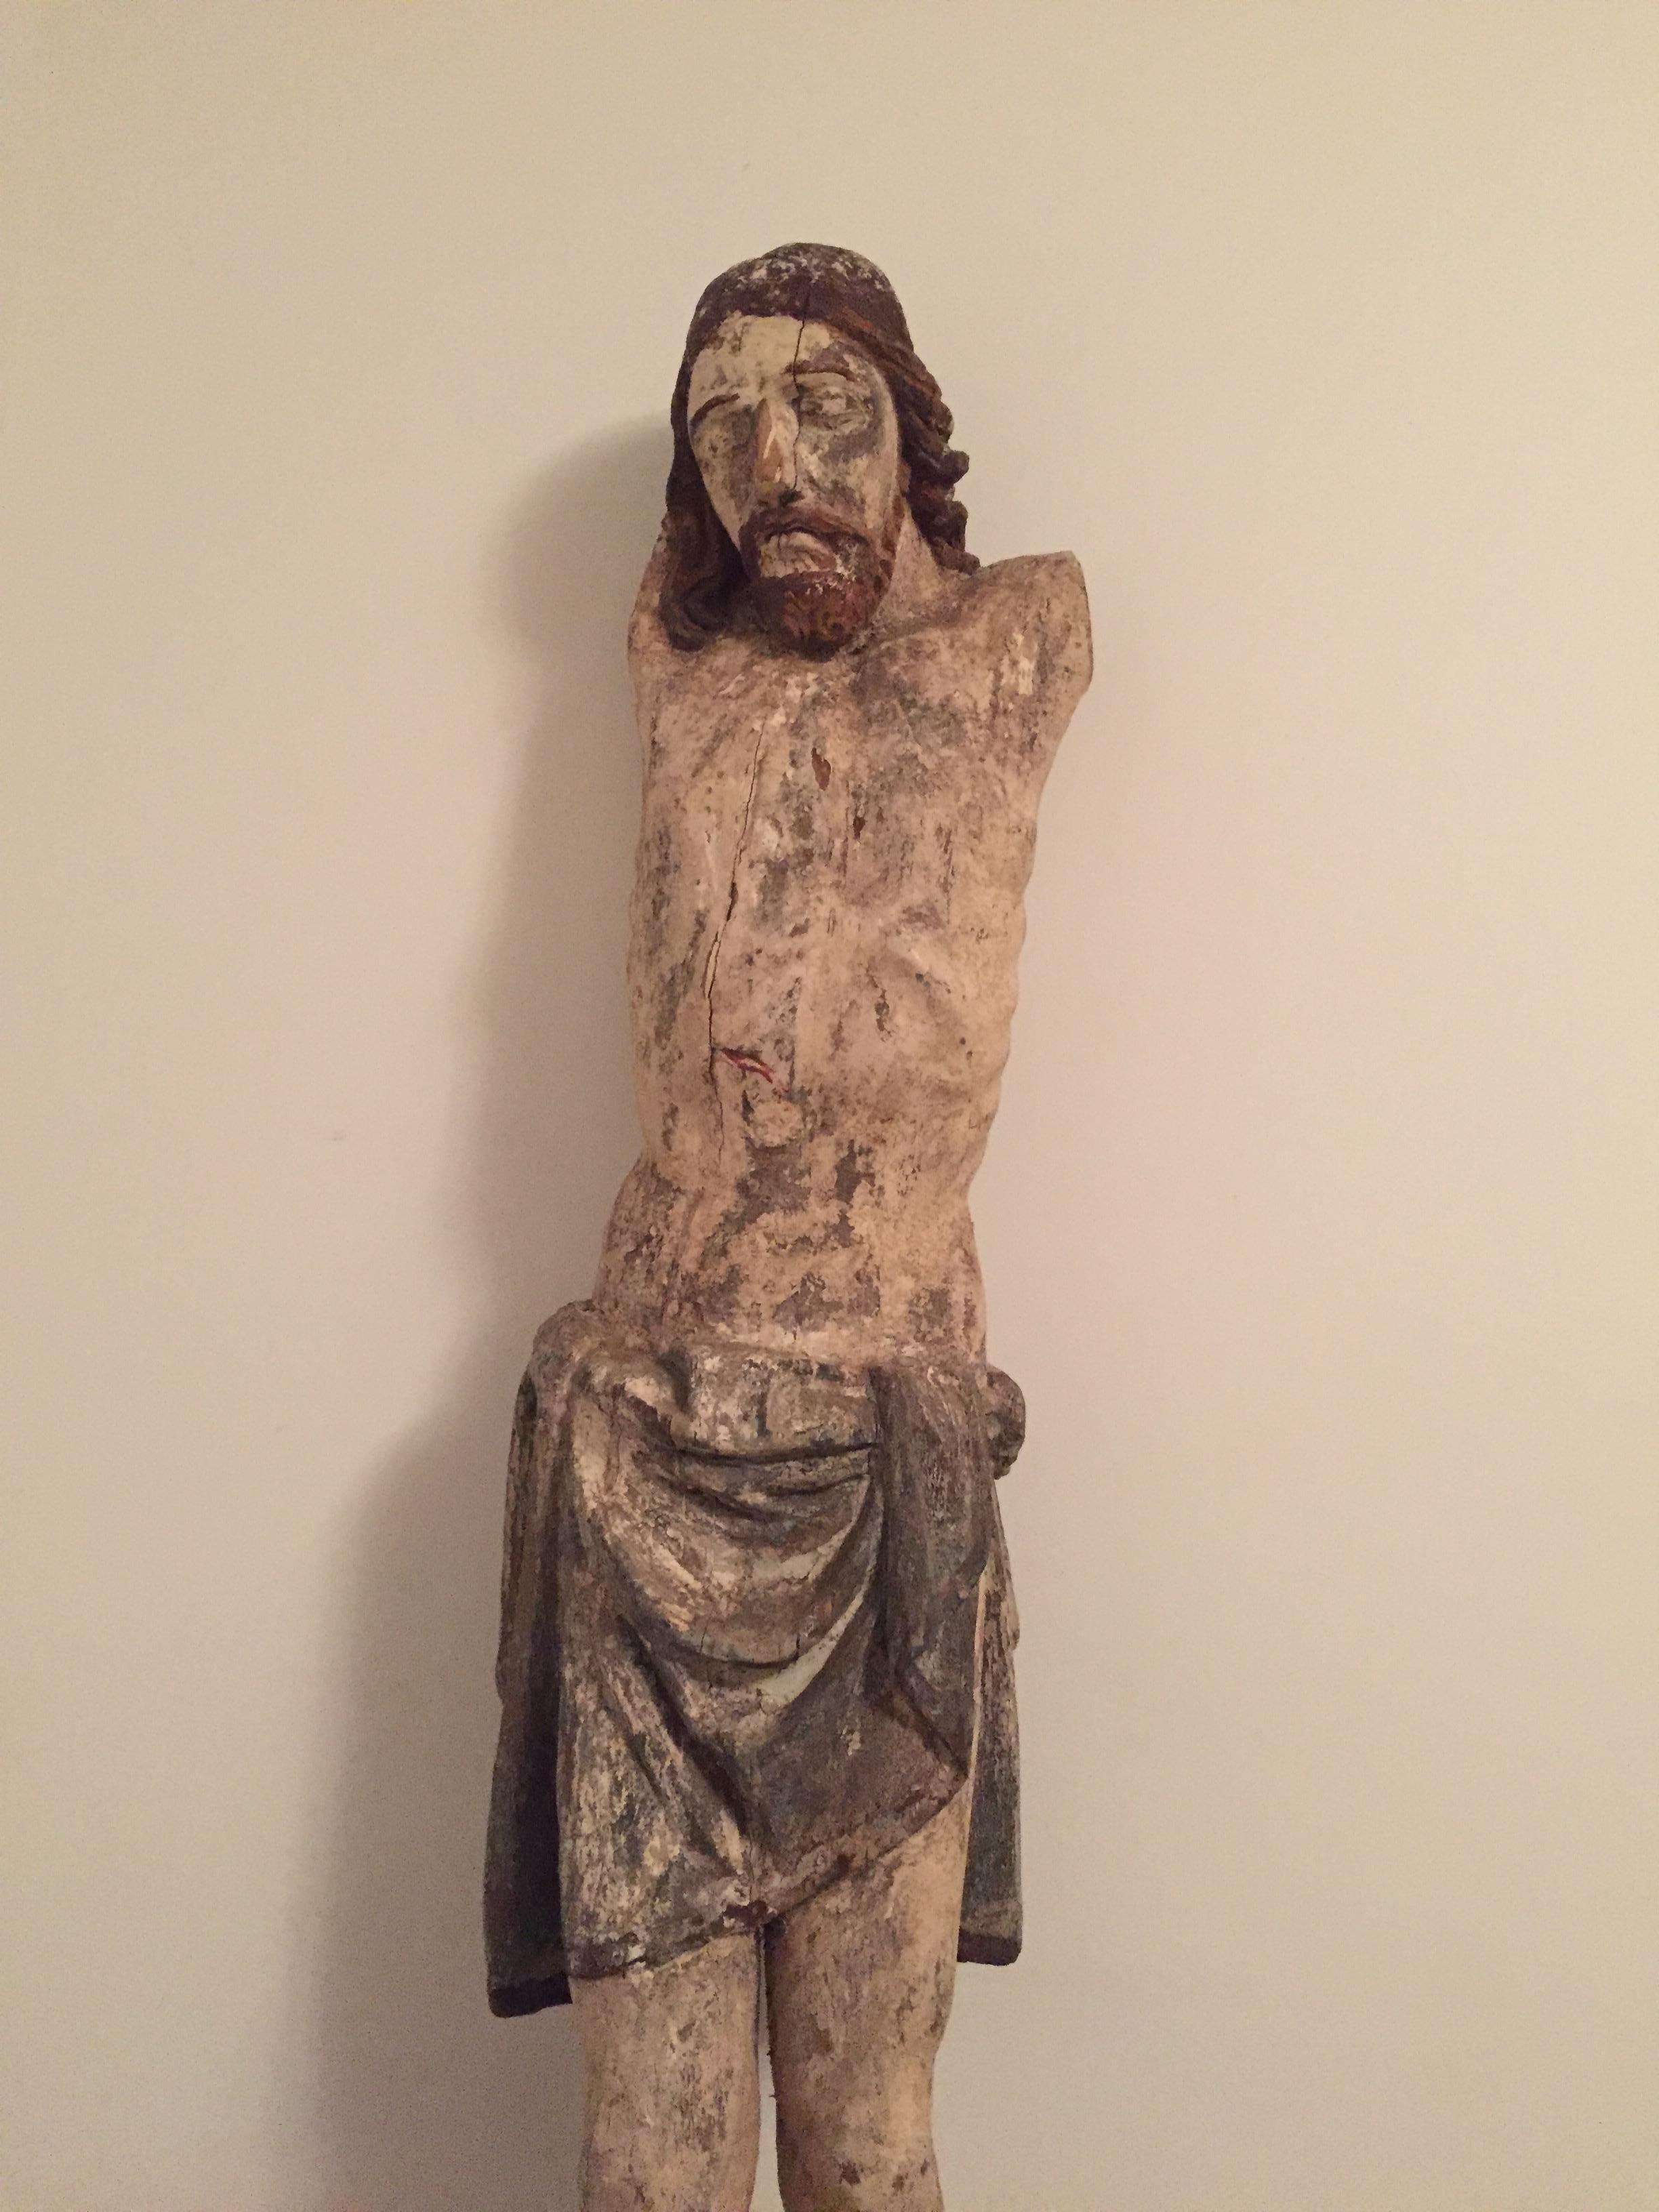 Impressive religious rustic naive Folk Art handcarved wood Jesus Christ Crucifixion sculpture, early 19 th century European, unique., as is. Age damage gives more beauty and character to this rare piece.